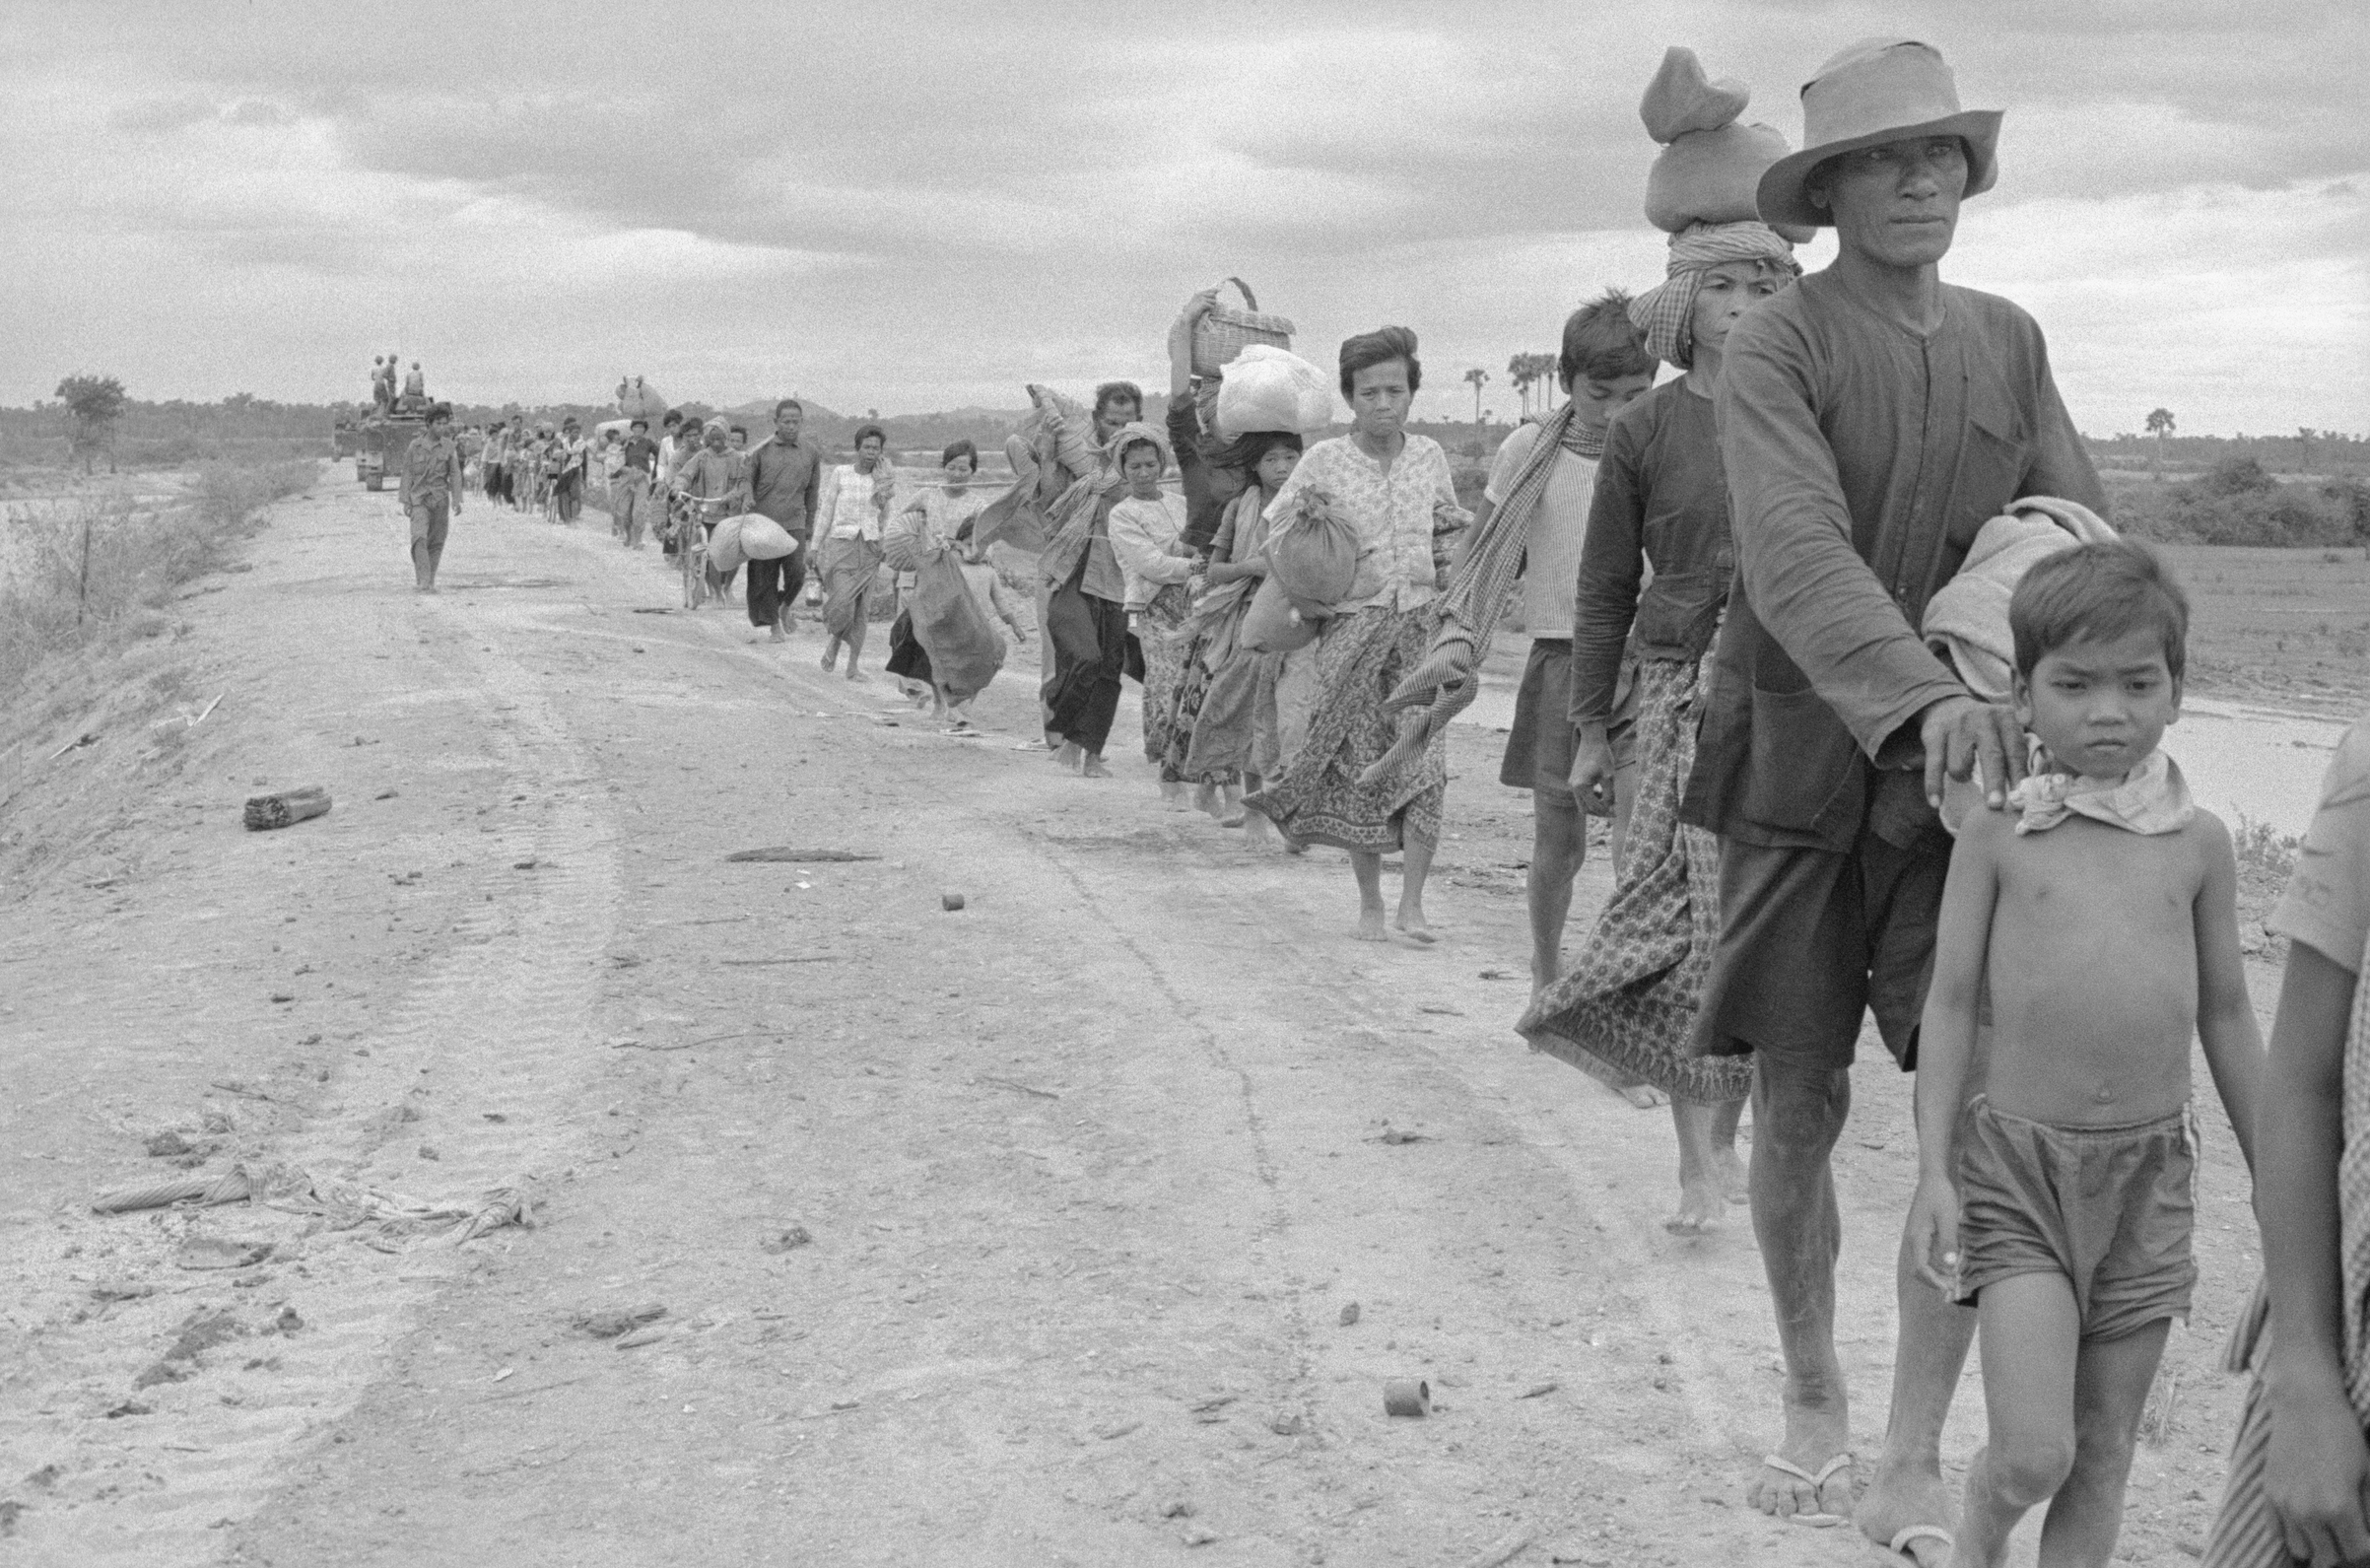 Long lines of refugees on the move some 17 kilometers from the capital in Cambodia in 1975 (Bettmann/Getty Images)